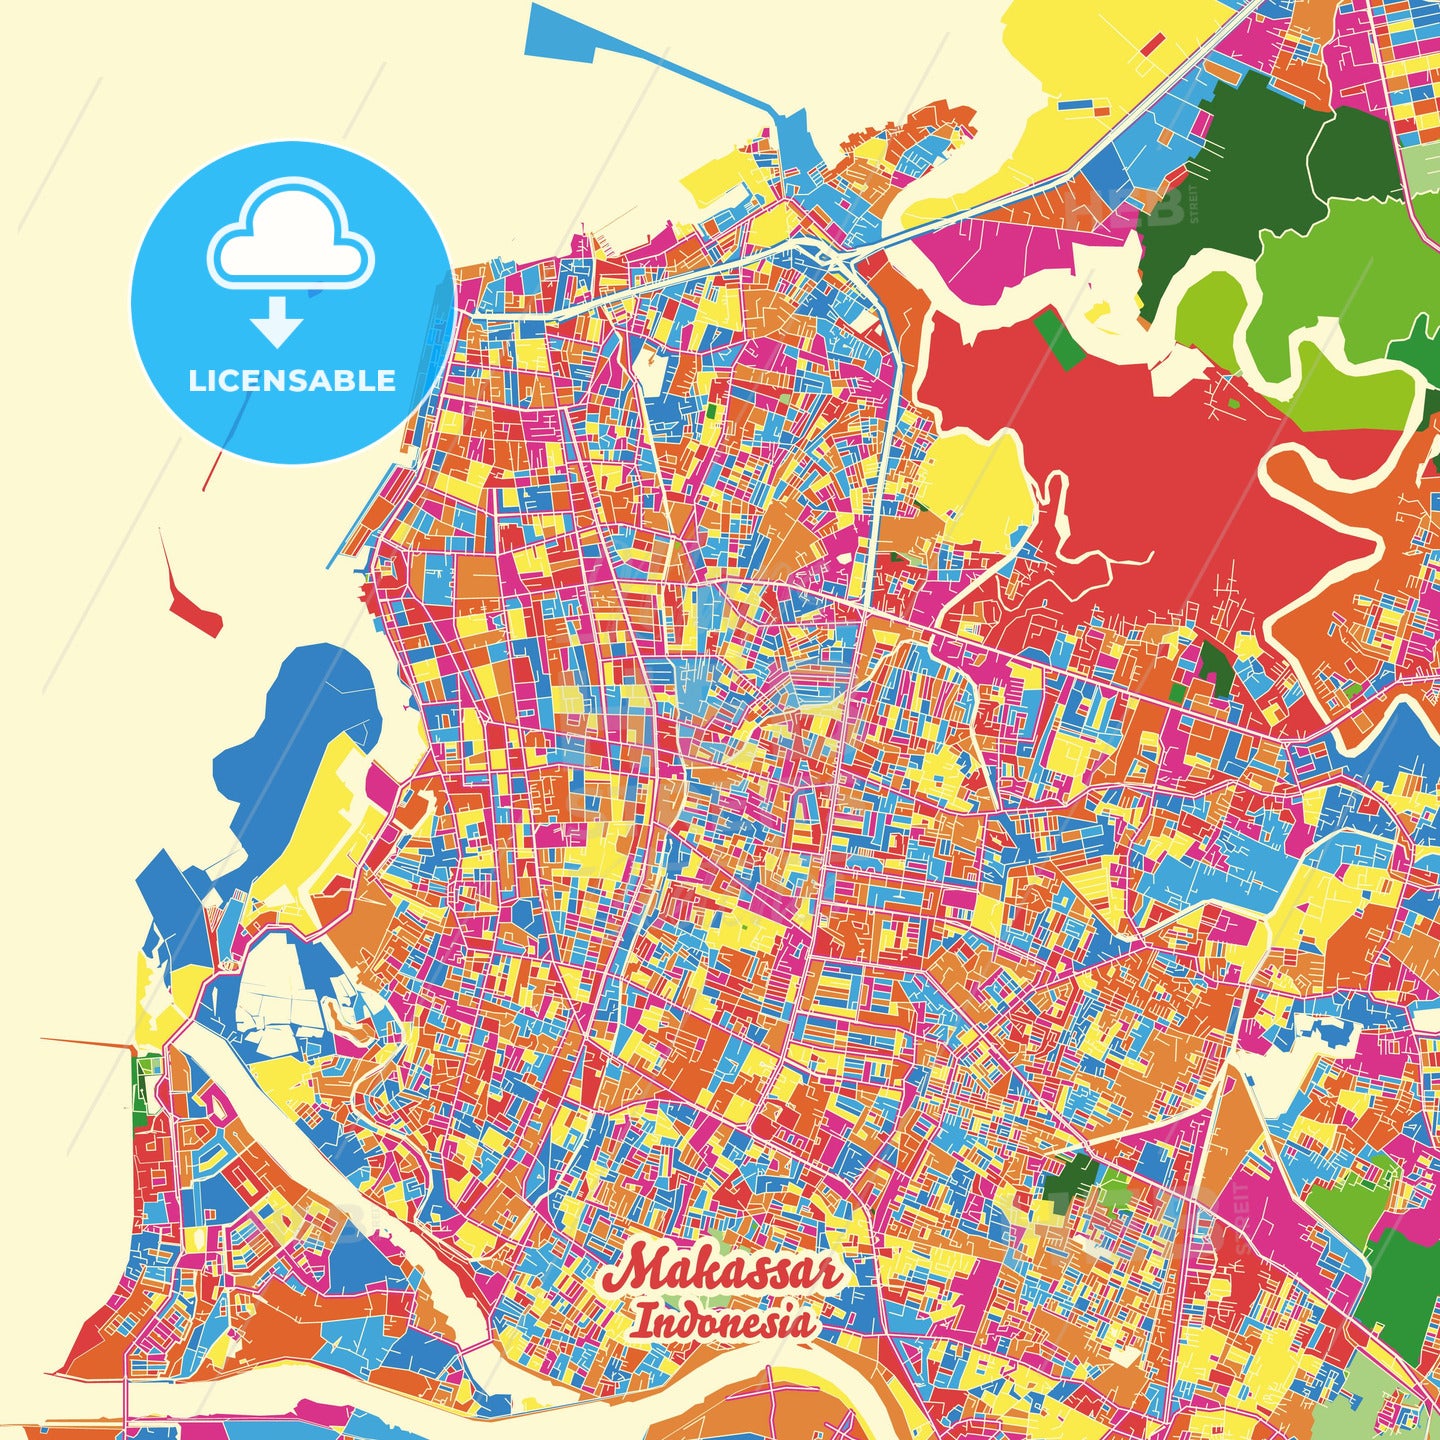 Makassar, Indonesia Crazy Colorful Street Map Poster Template - HEBSTREITS Sketches